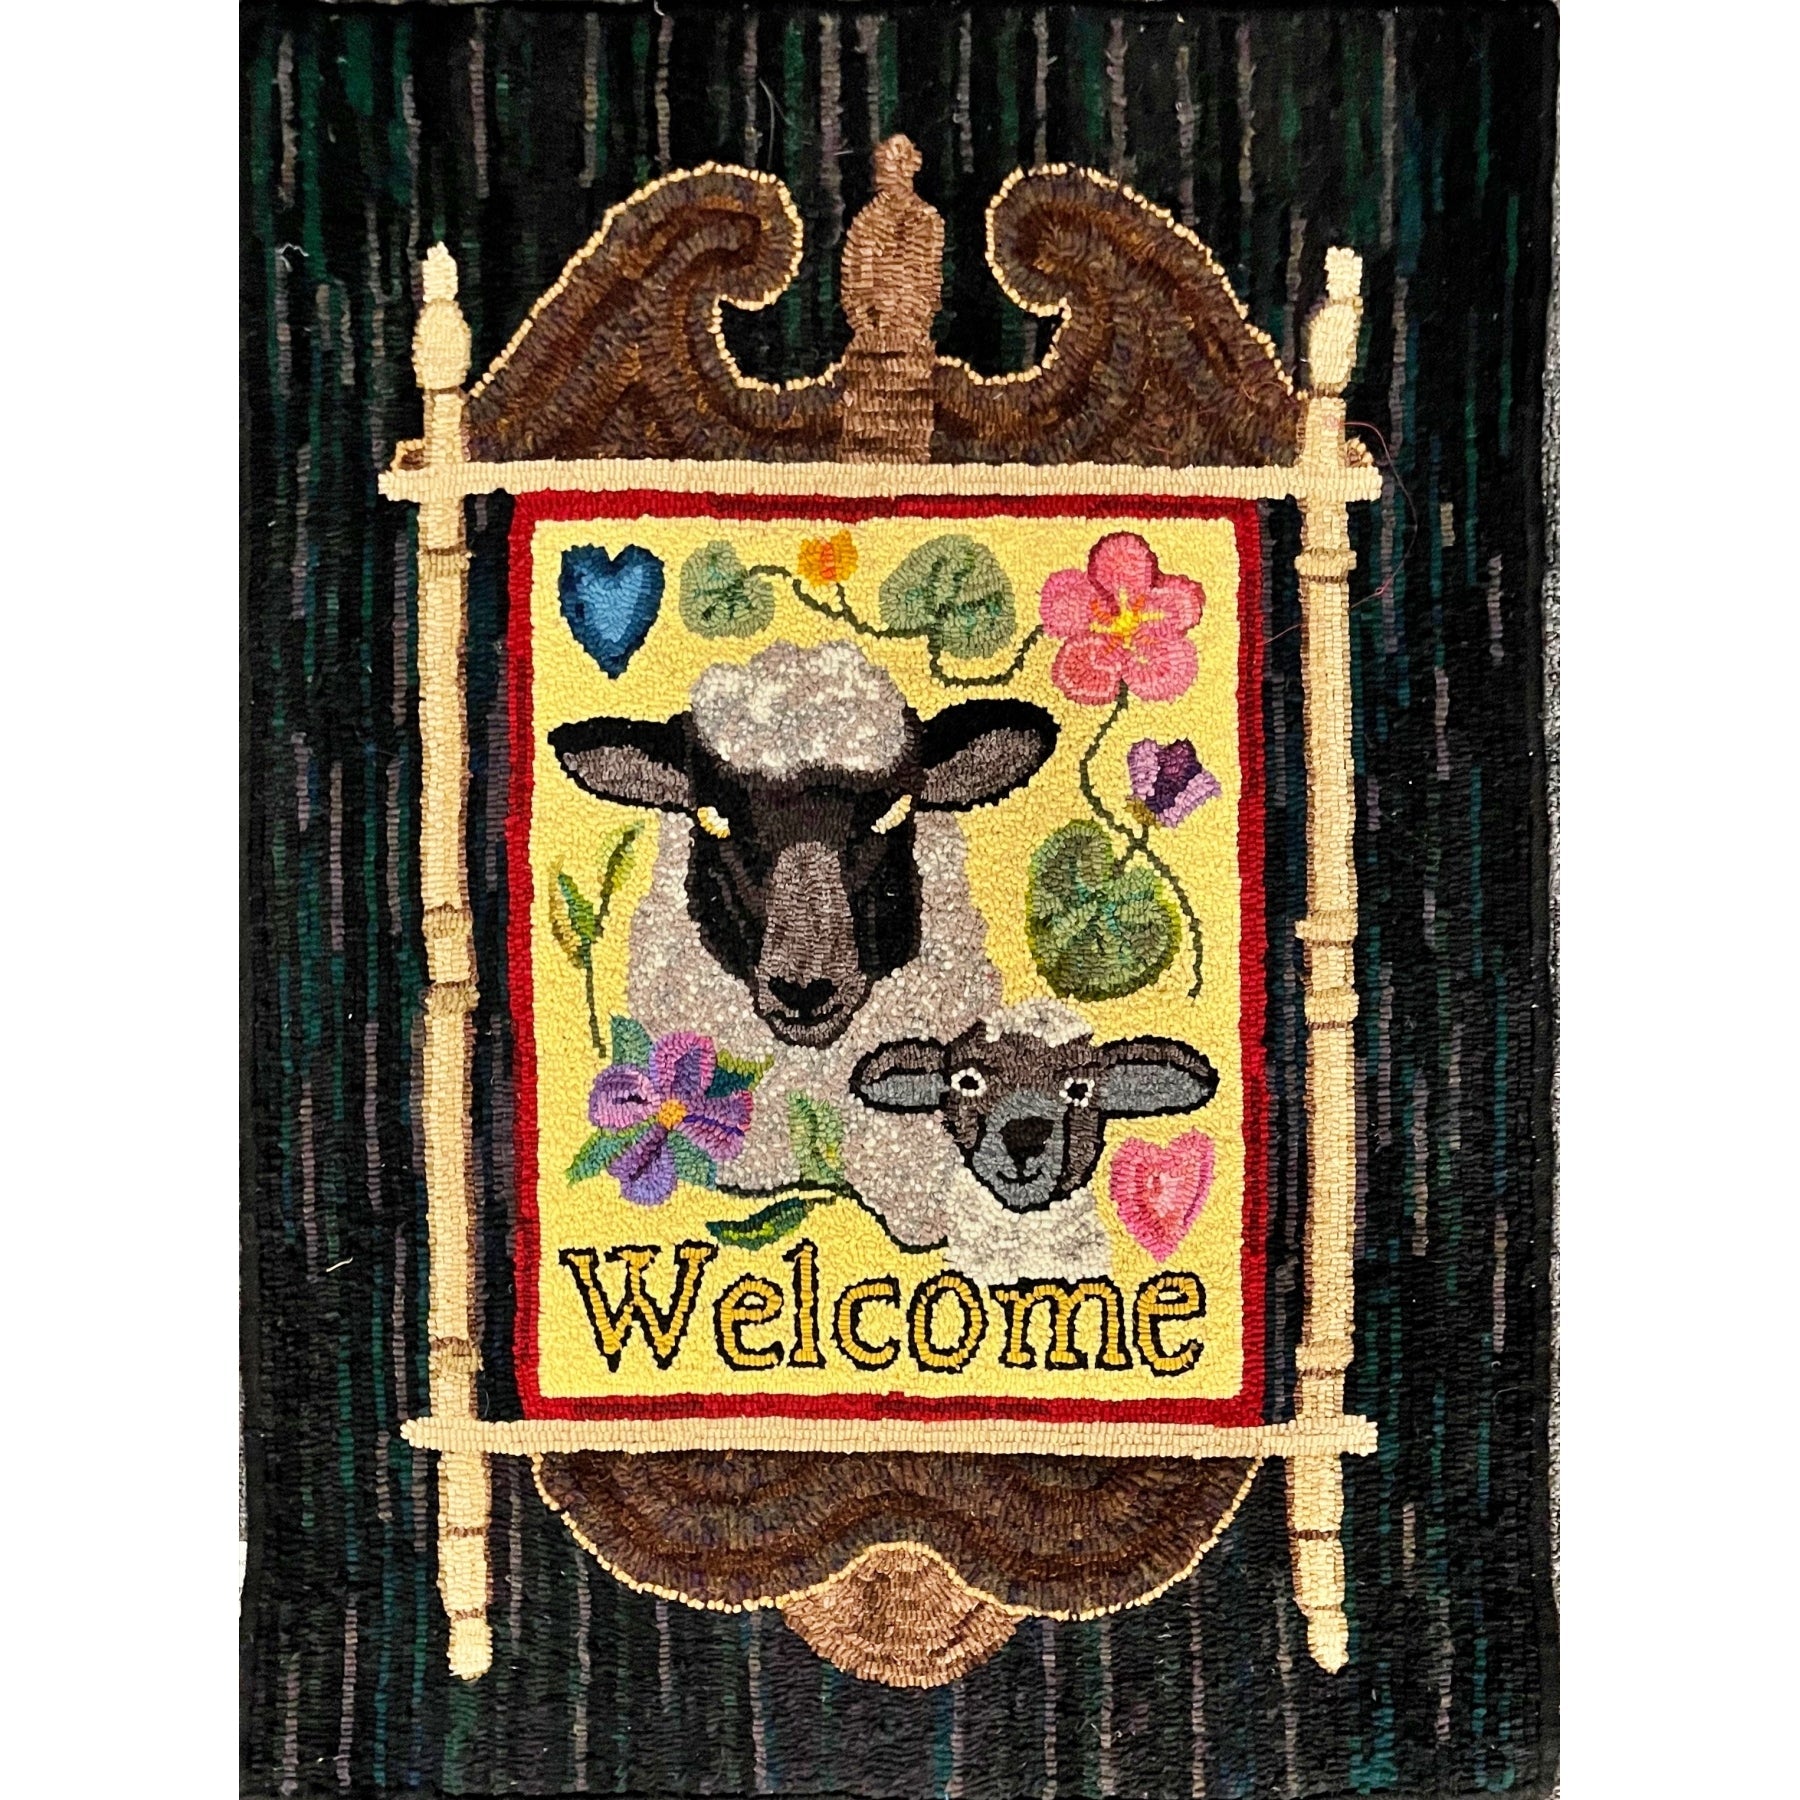 A Wooly Welcome, rug hooked by Judy Peluso